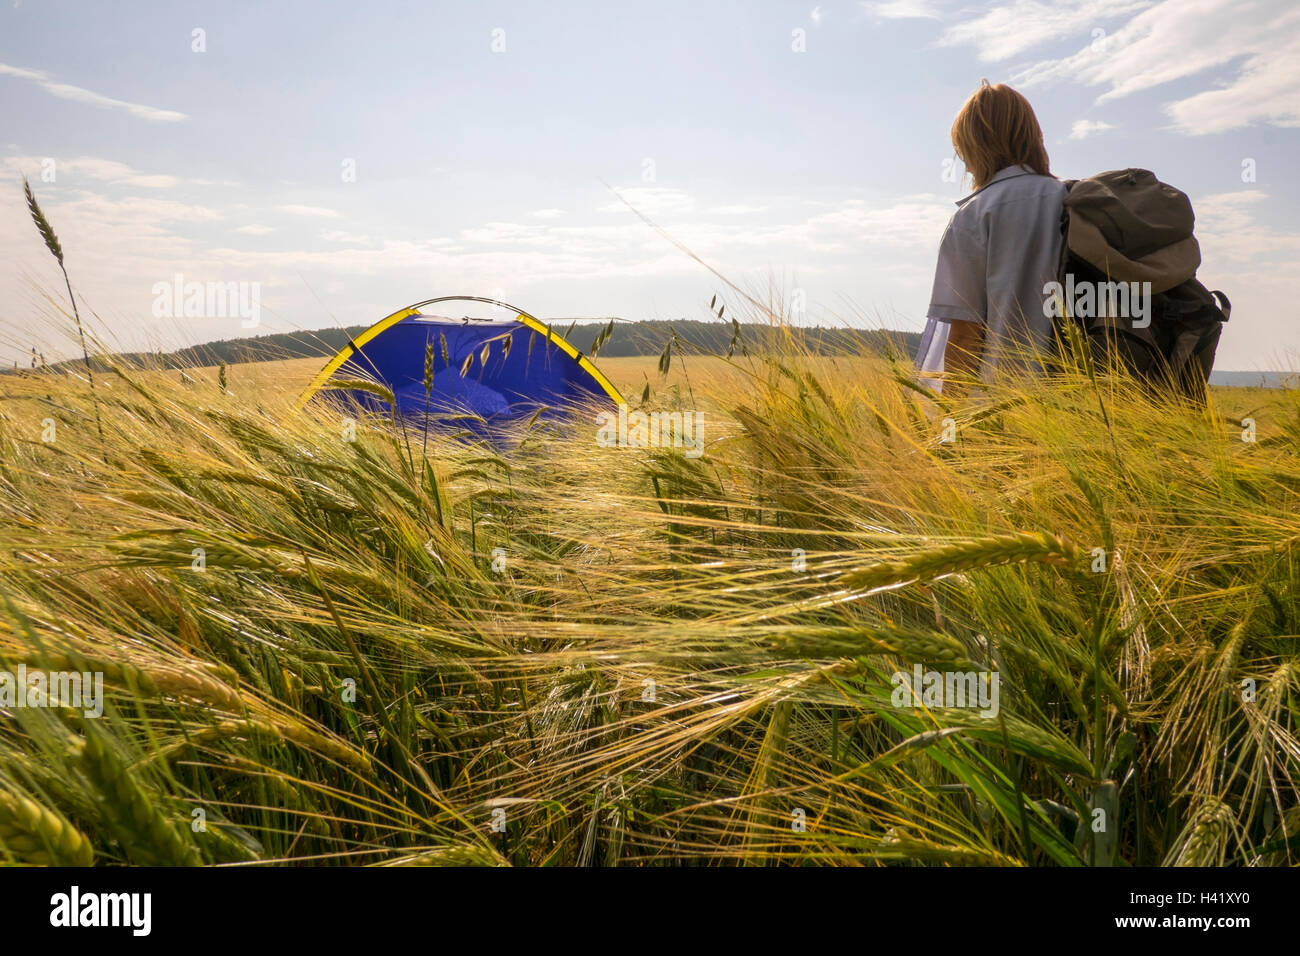 Caucasian woman standing in field near camping tent Stock Photo